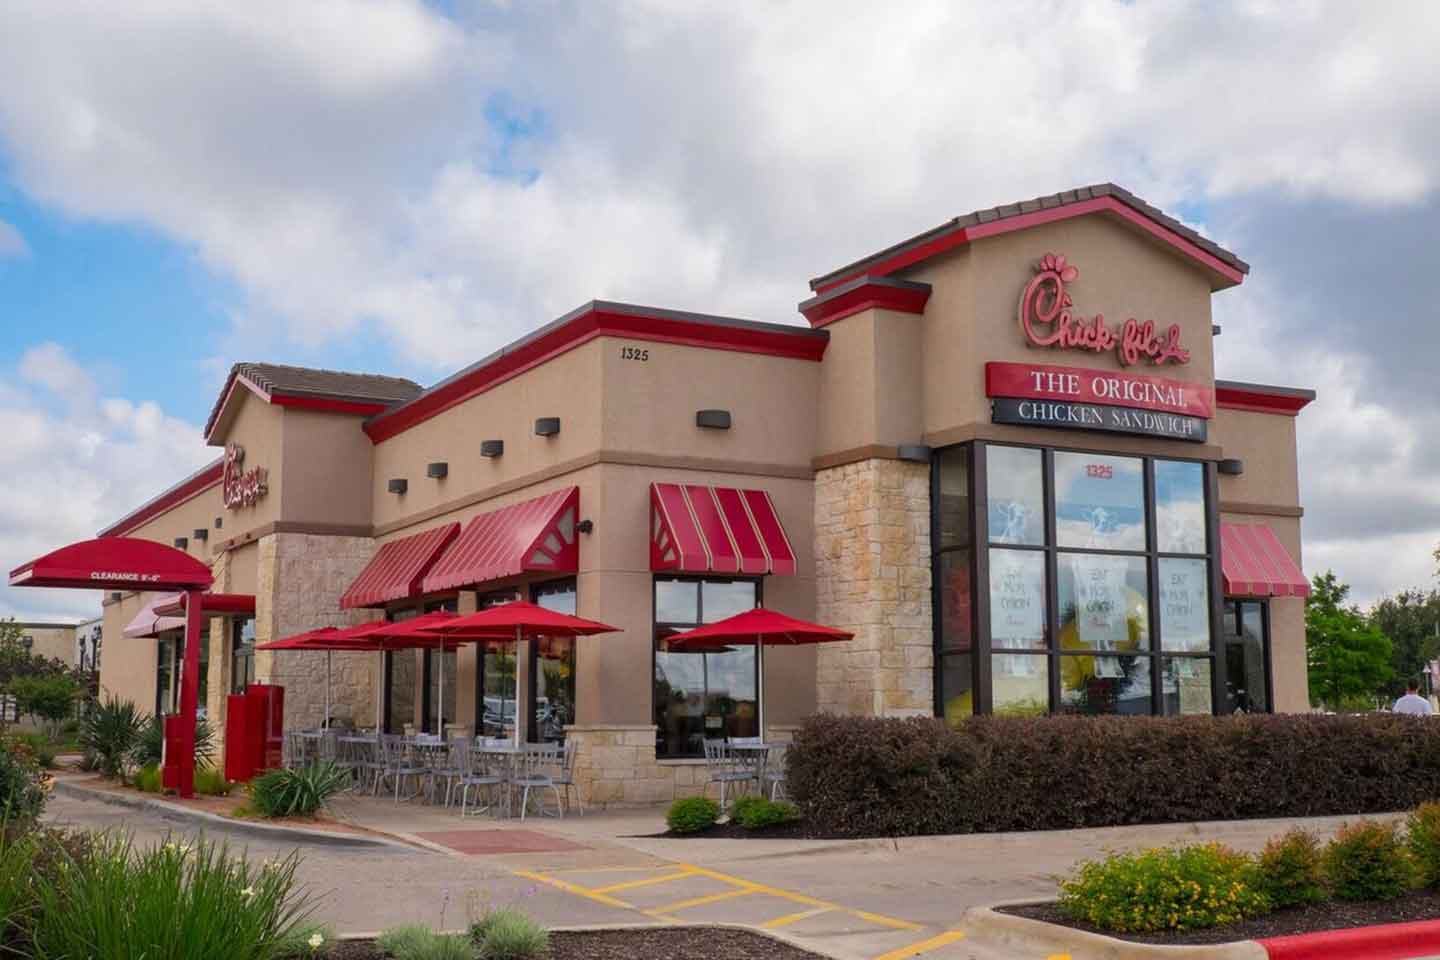 ChickFilA’s remodel draws attention from customers The Central Times